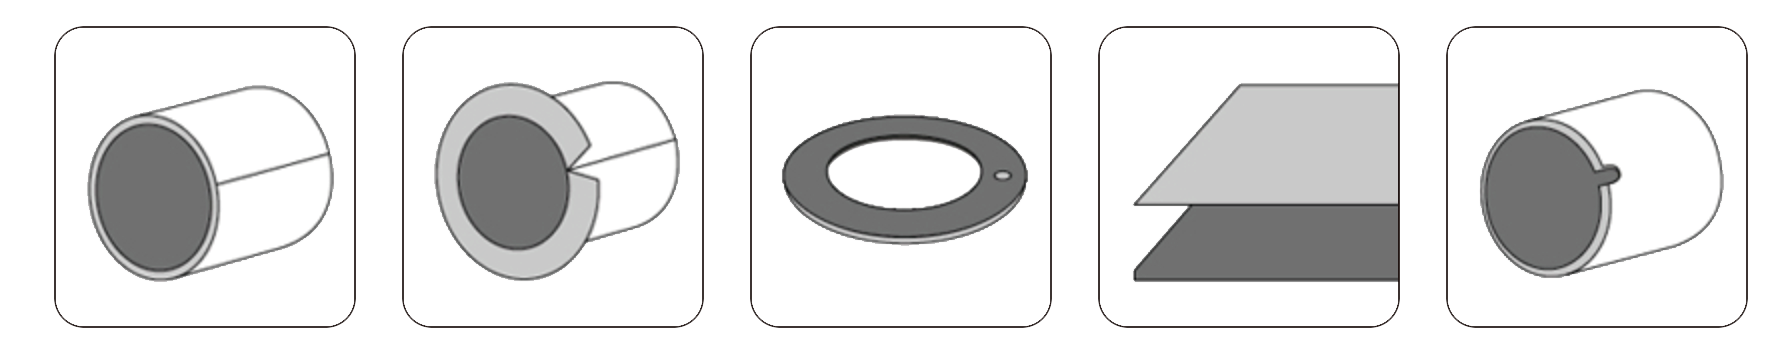 Type of bearing structure